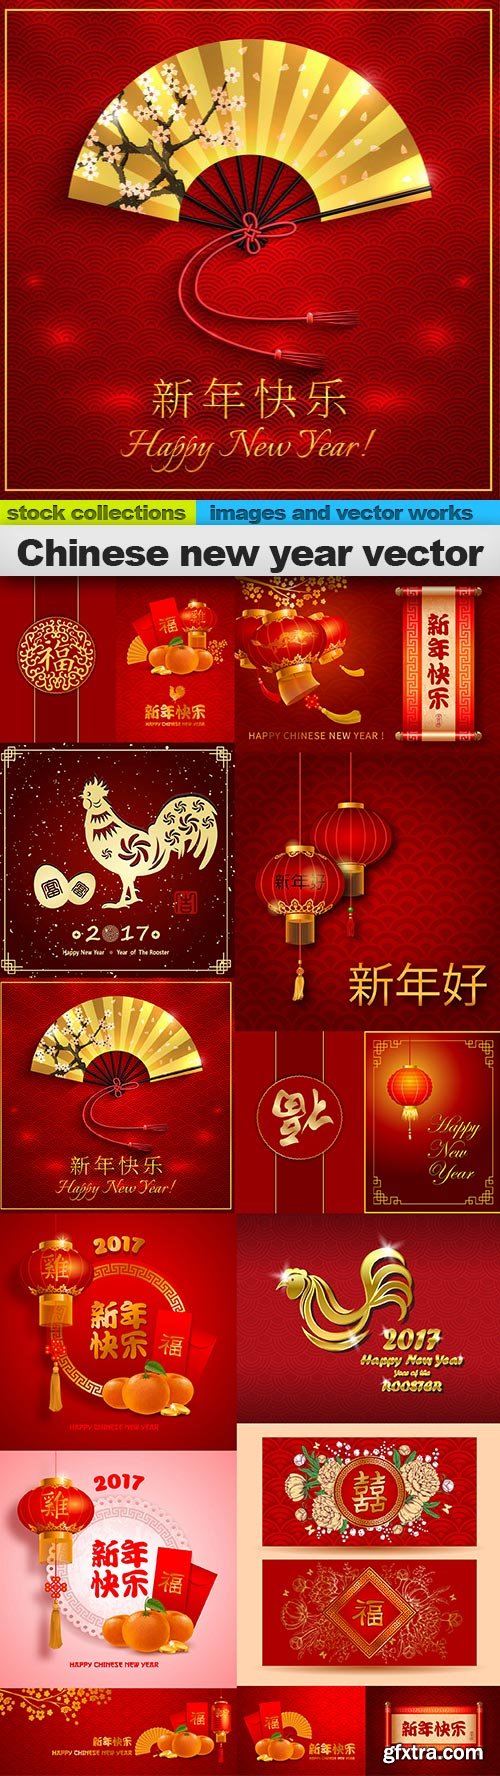 Chinese new year vector, 15 x EPS